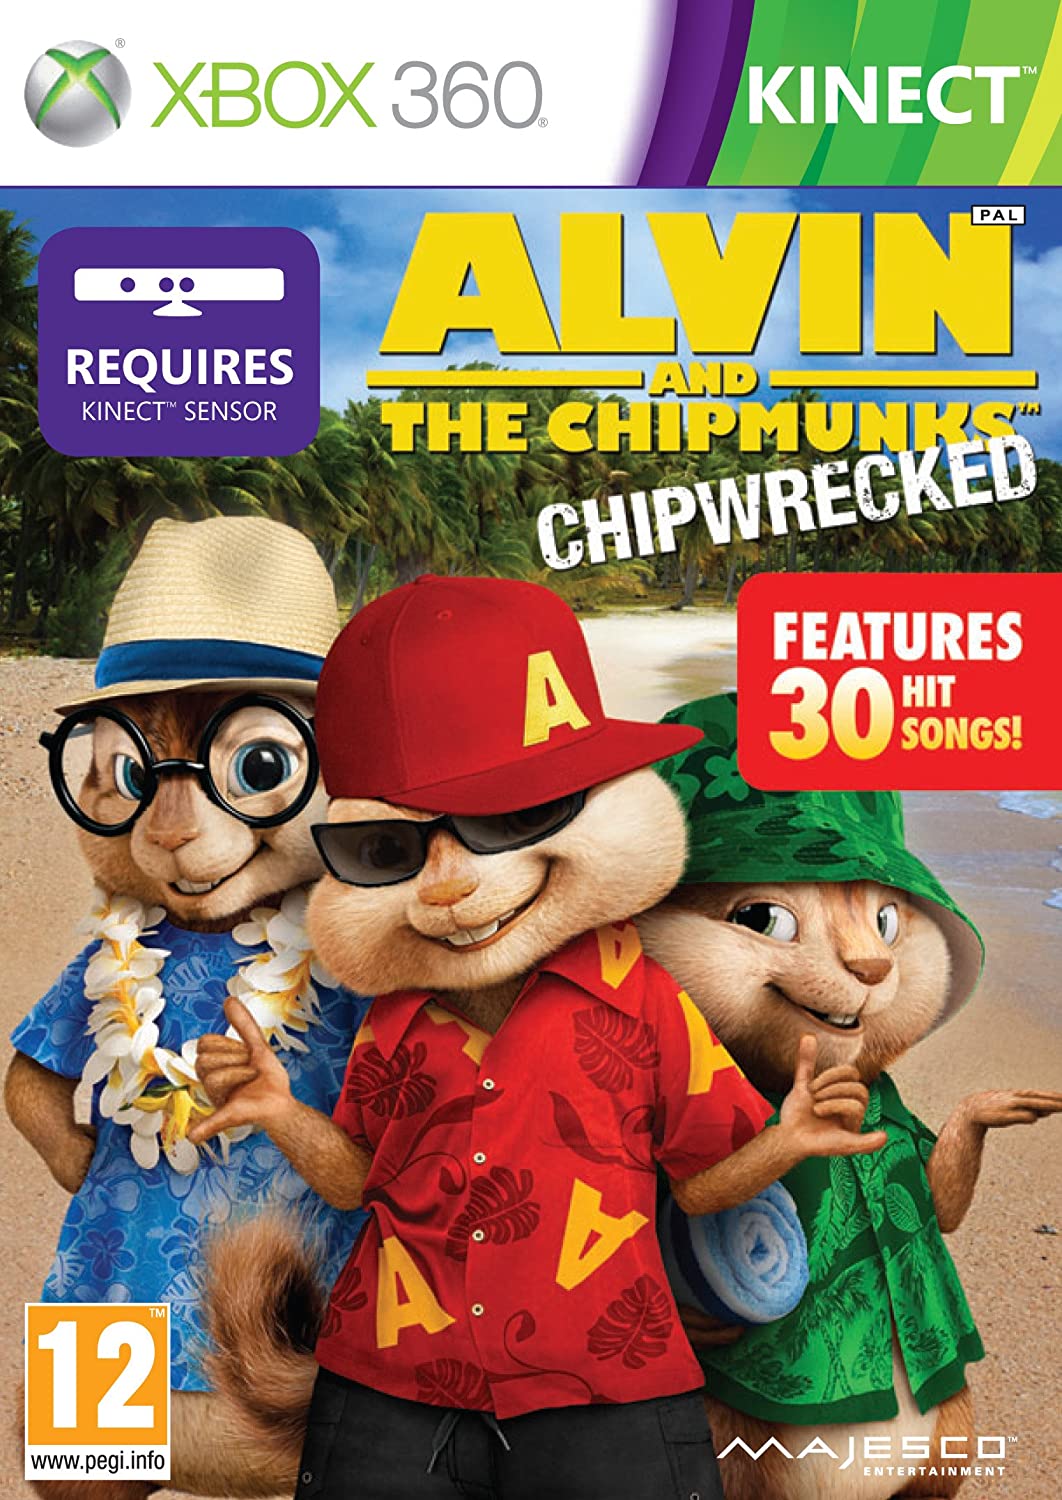 Kinect Alvin and The Chipmunks: Chipwrecked - Xbox 360 | Yard's Games Ltd